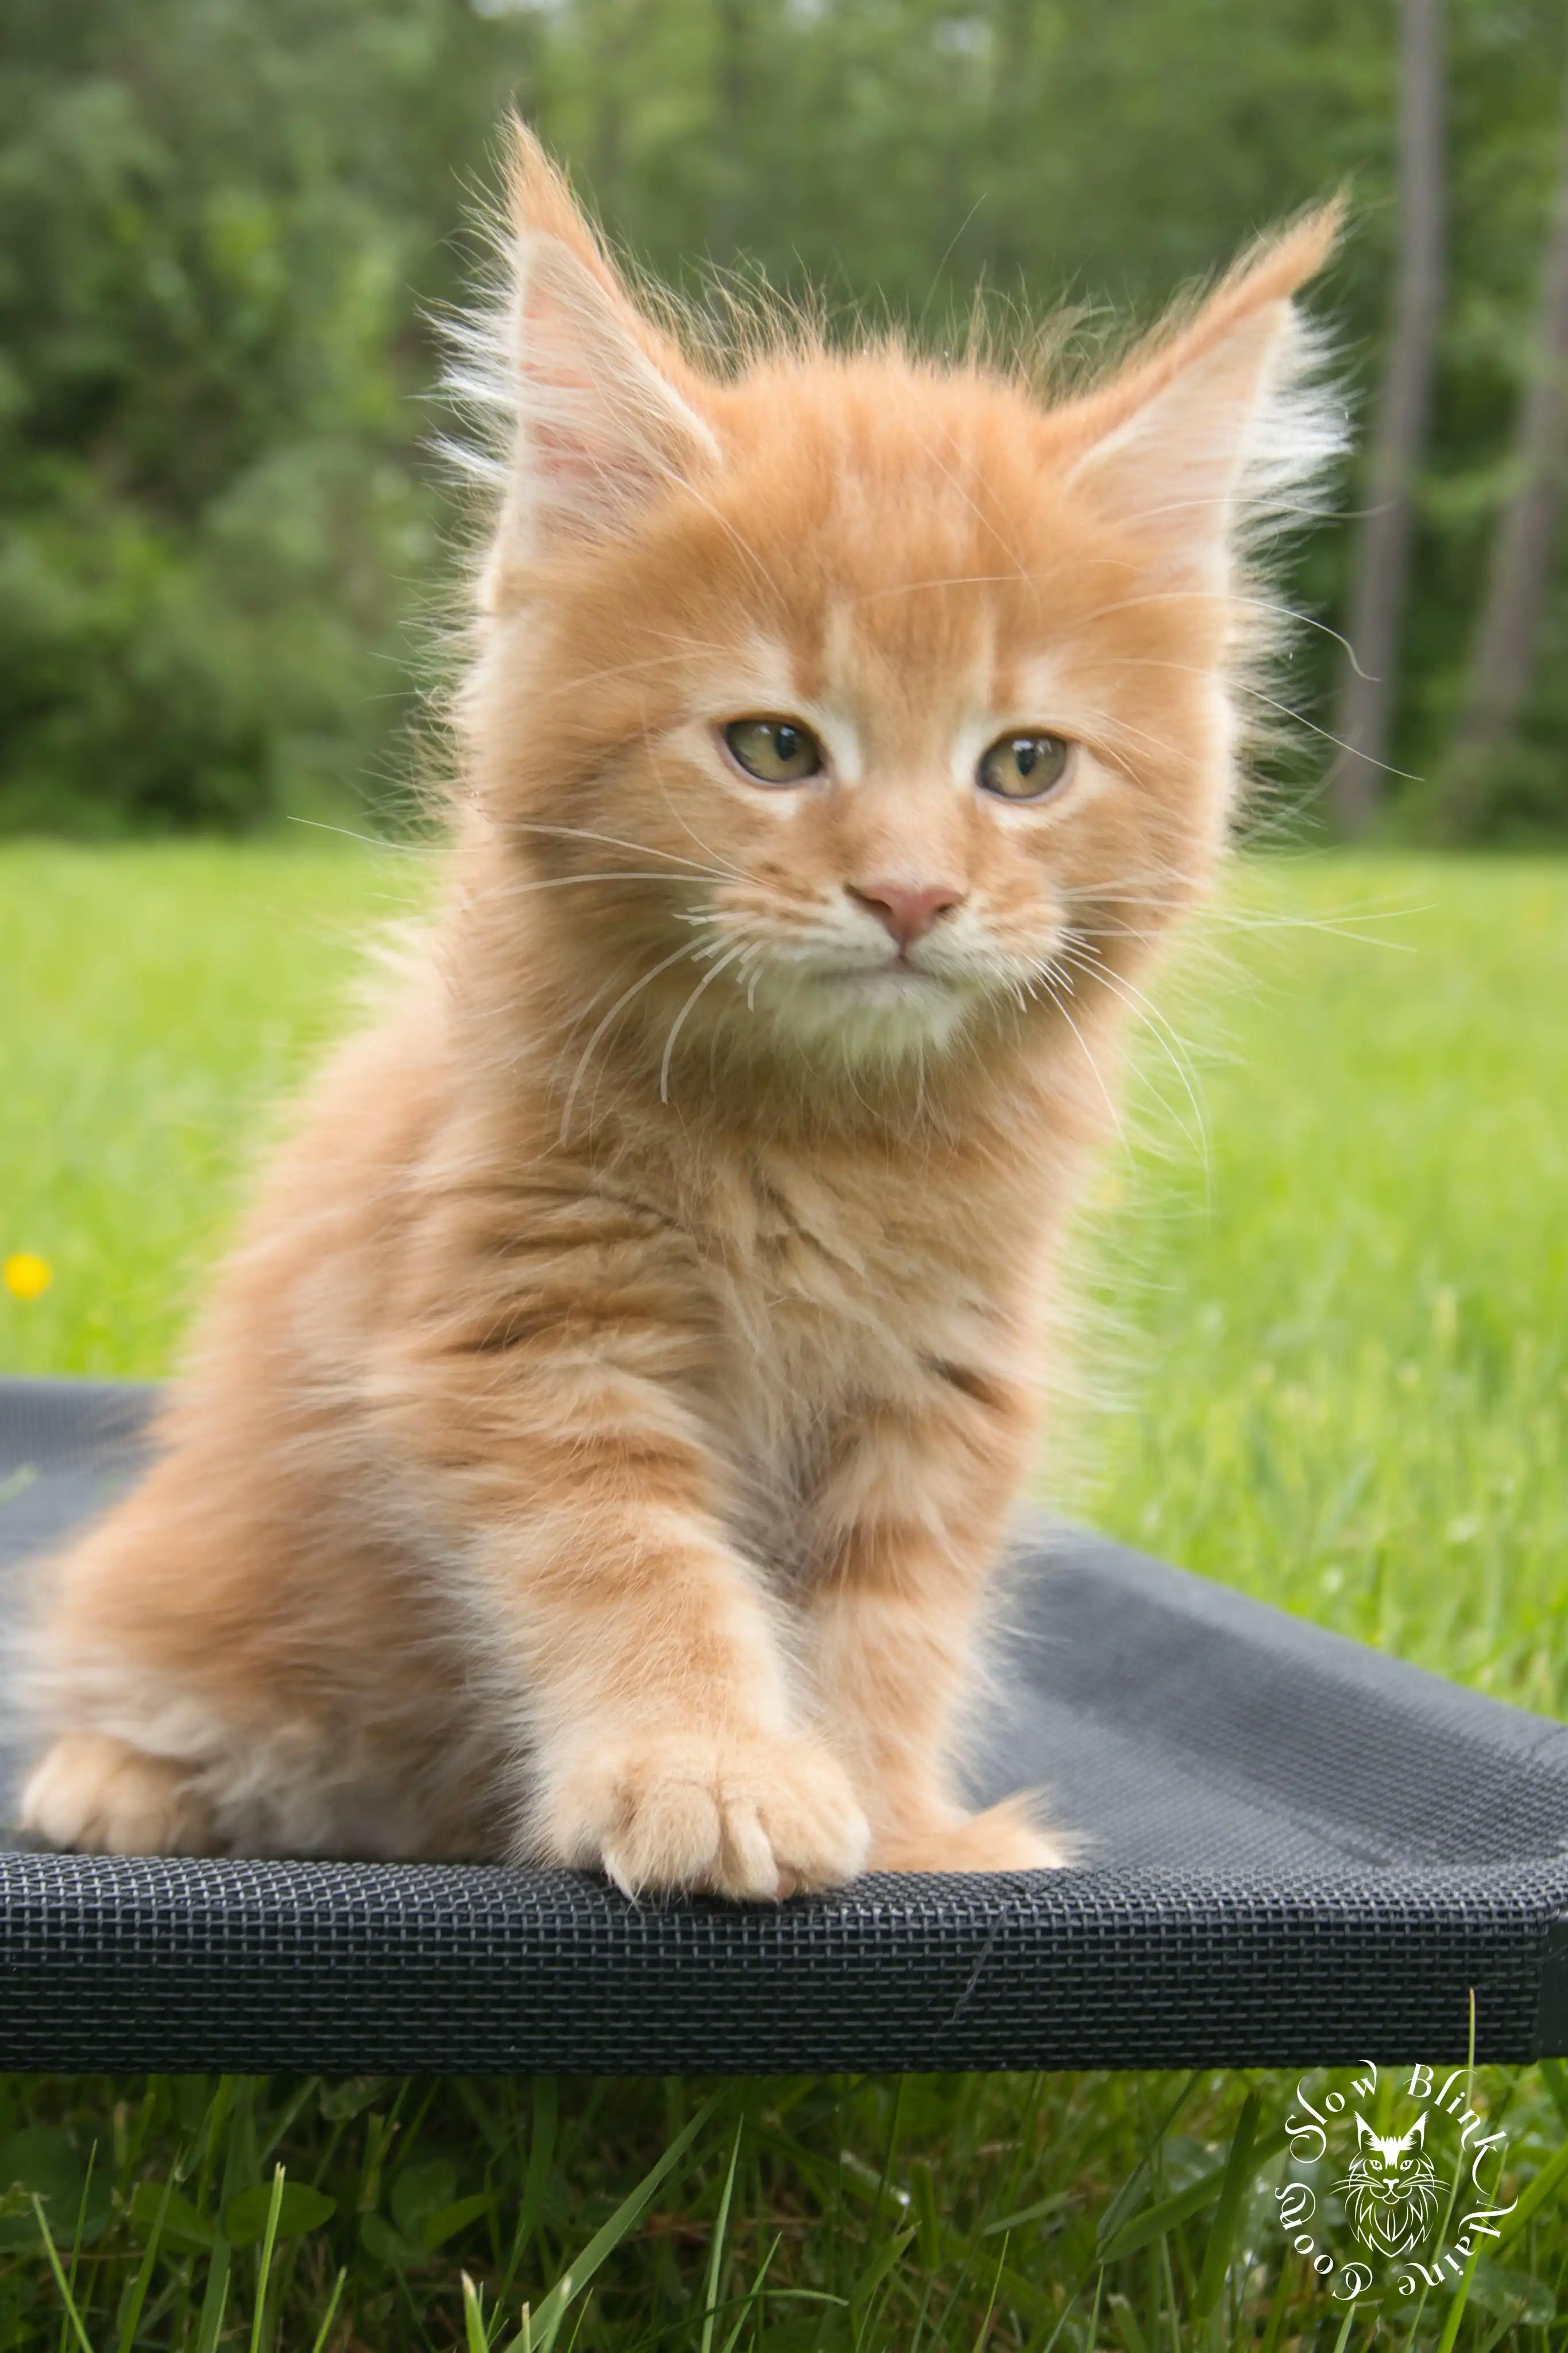 Orange (Red) Maine Coon Kittens > red orange maine coon kitten | slowblinkmainecoons | ems code d ds ds 22 1 15